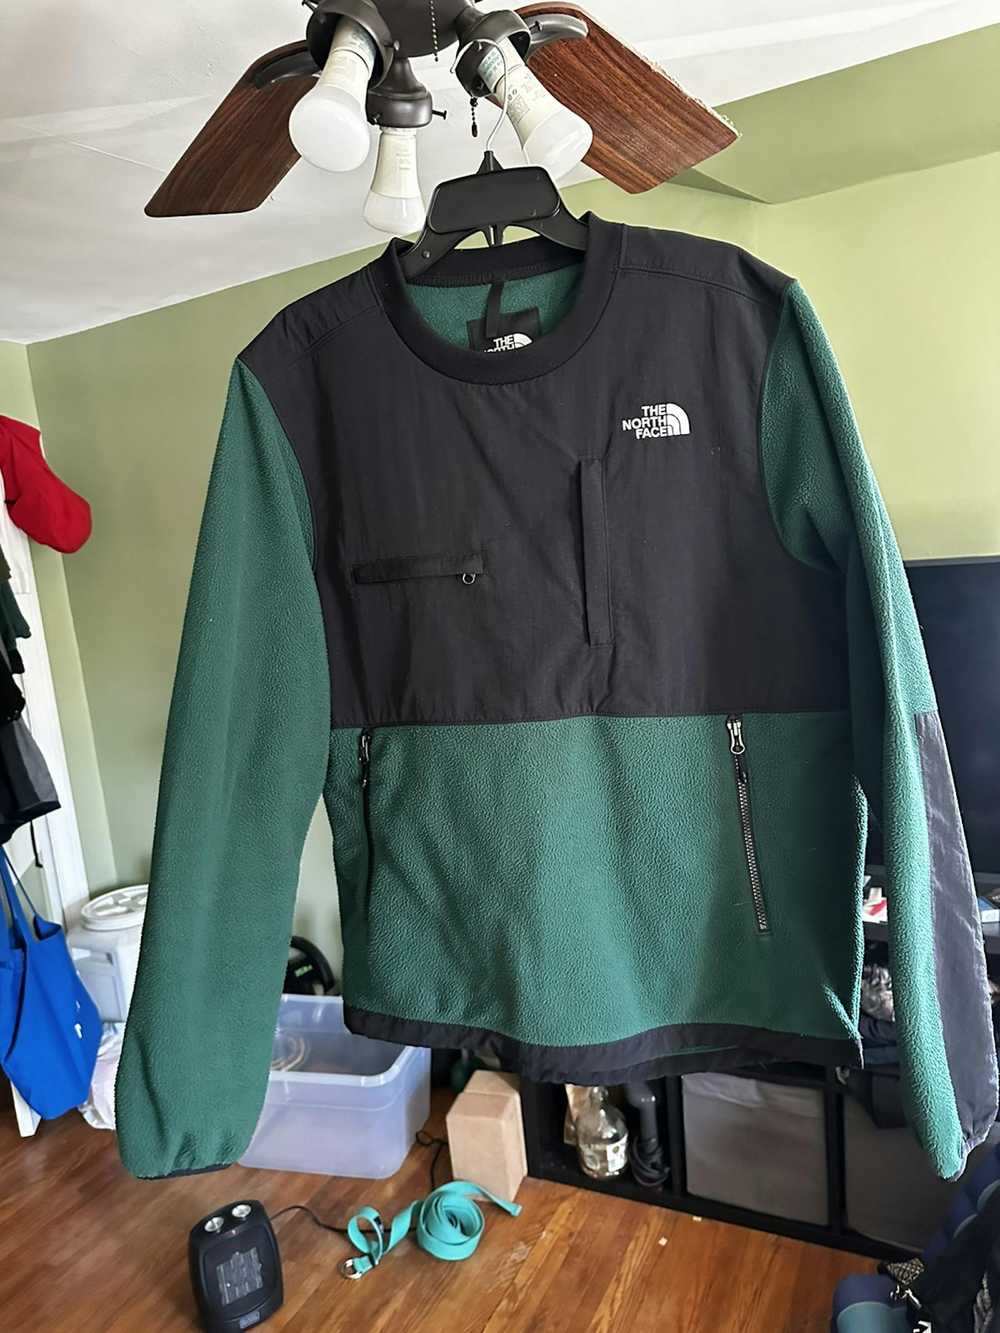 The North Face The north face crewneck - image 1